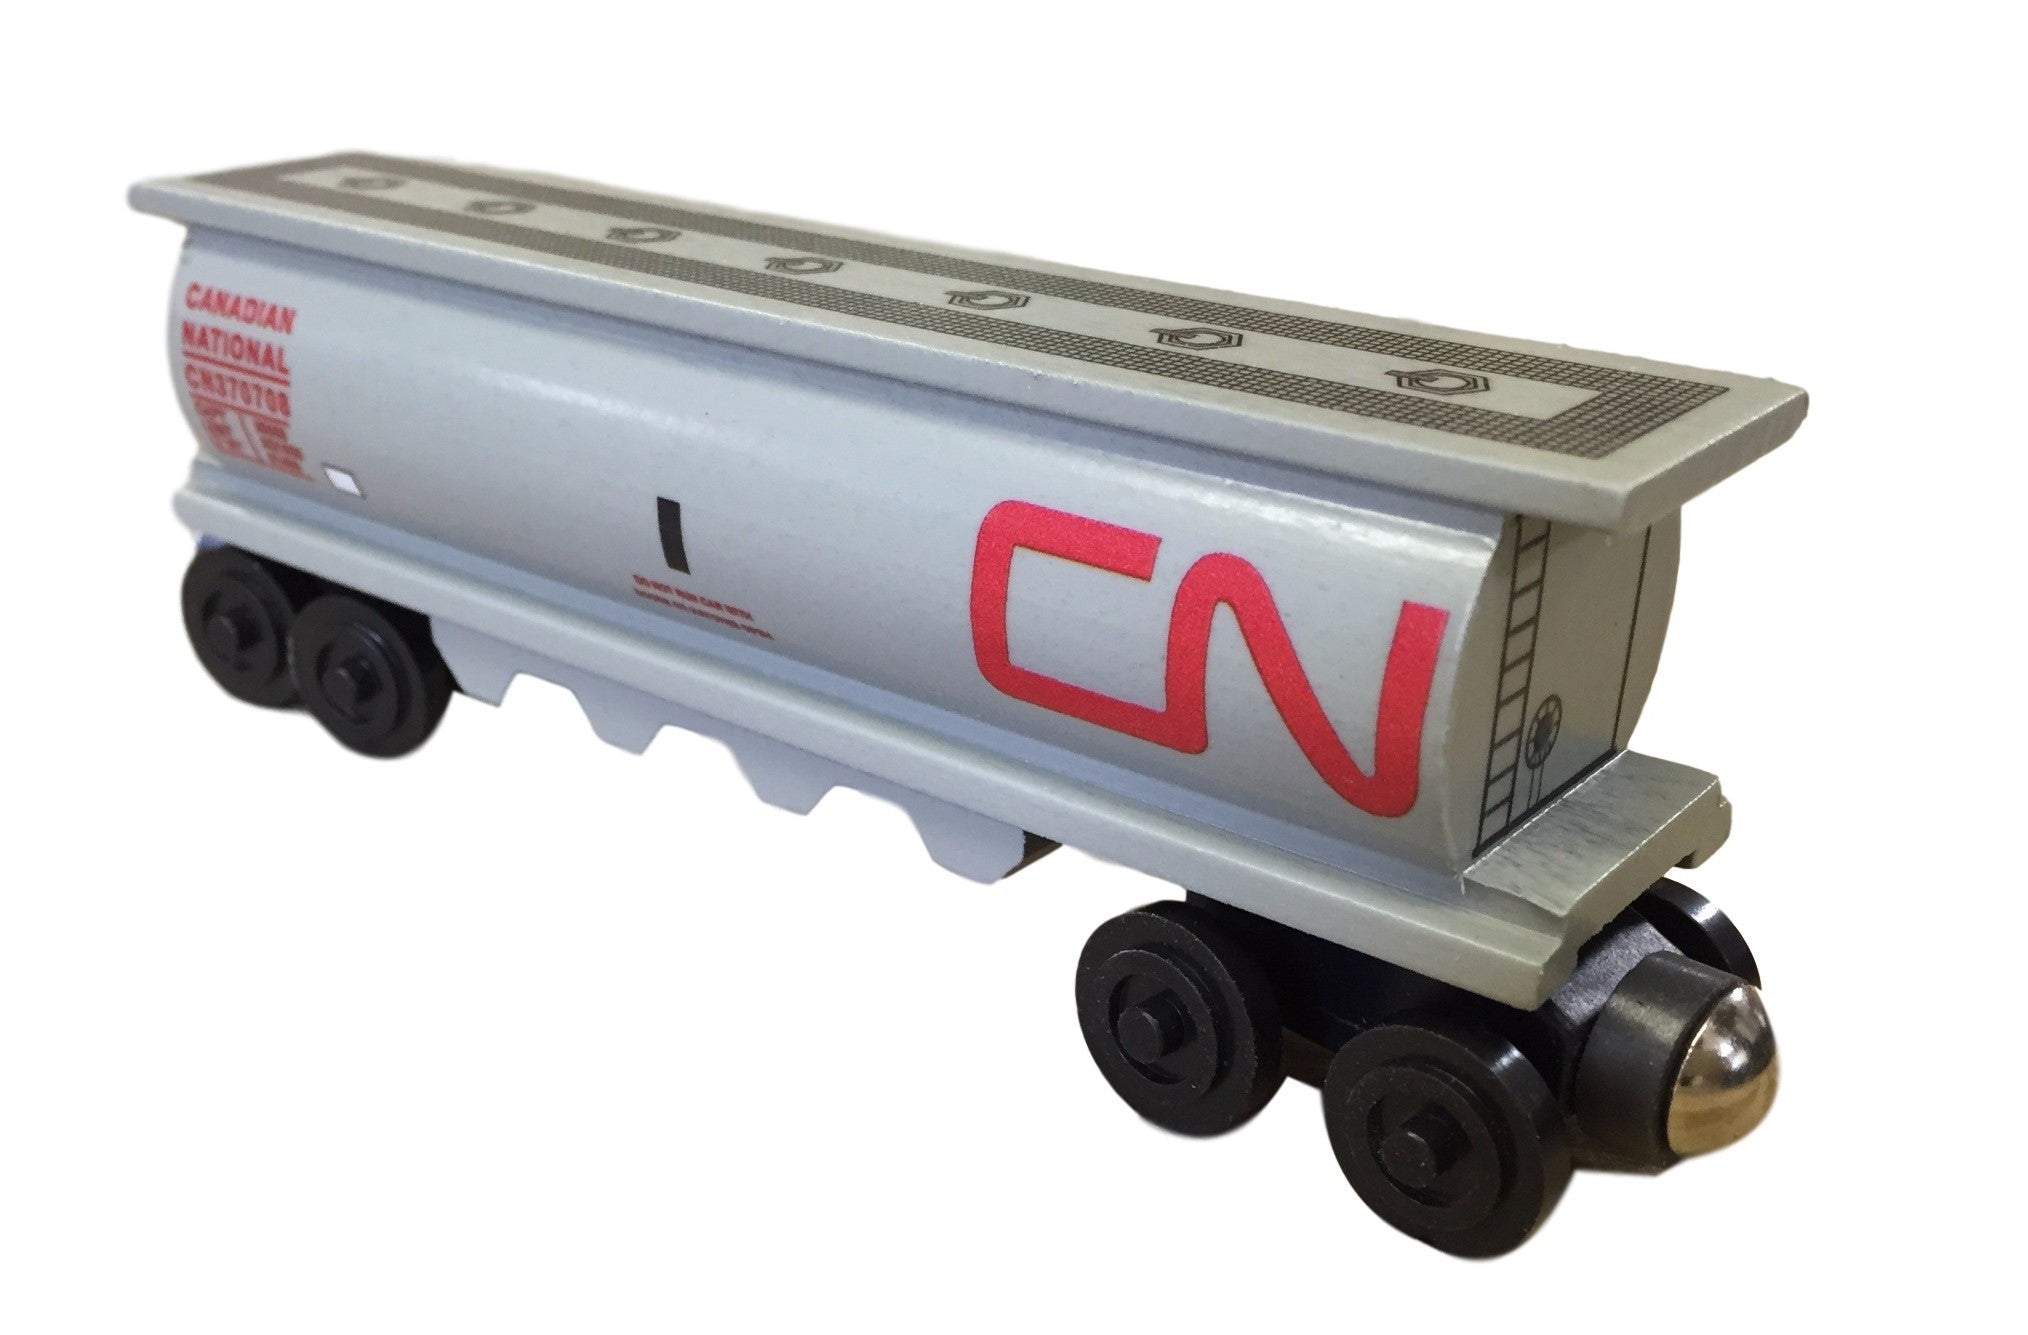 Whittle Shortline Railroad Canada National Gray Cylinder Hopper Wooden Toy Train